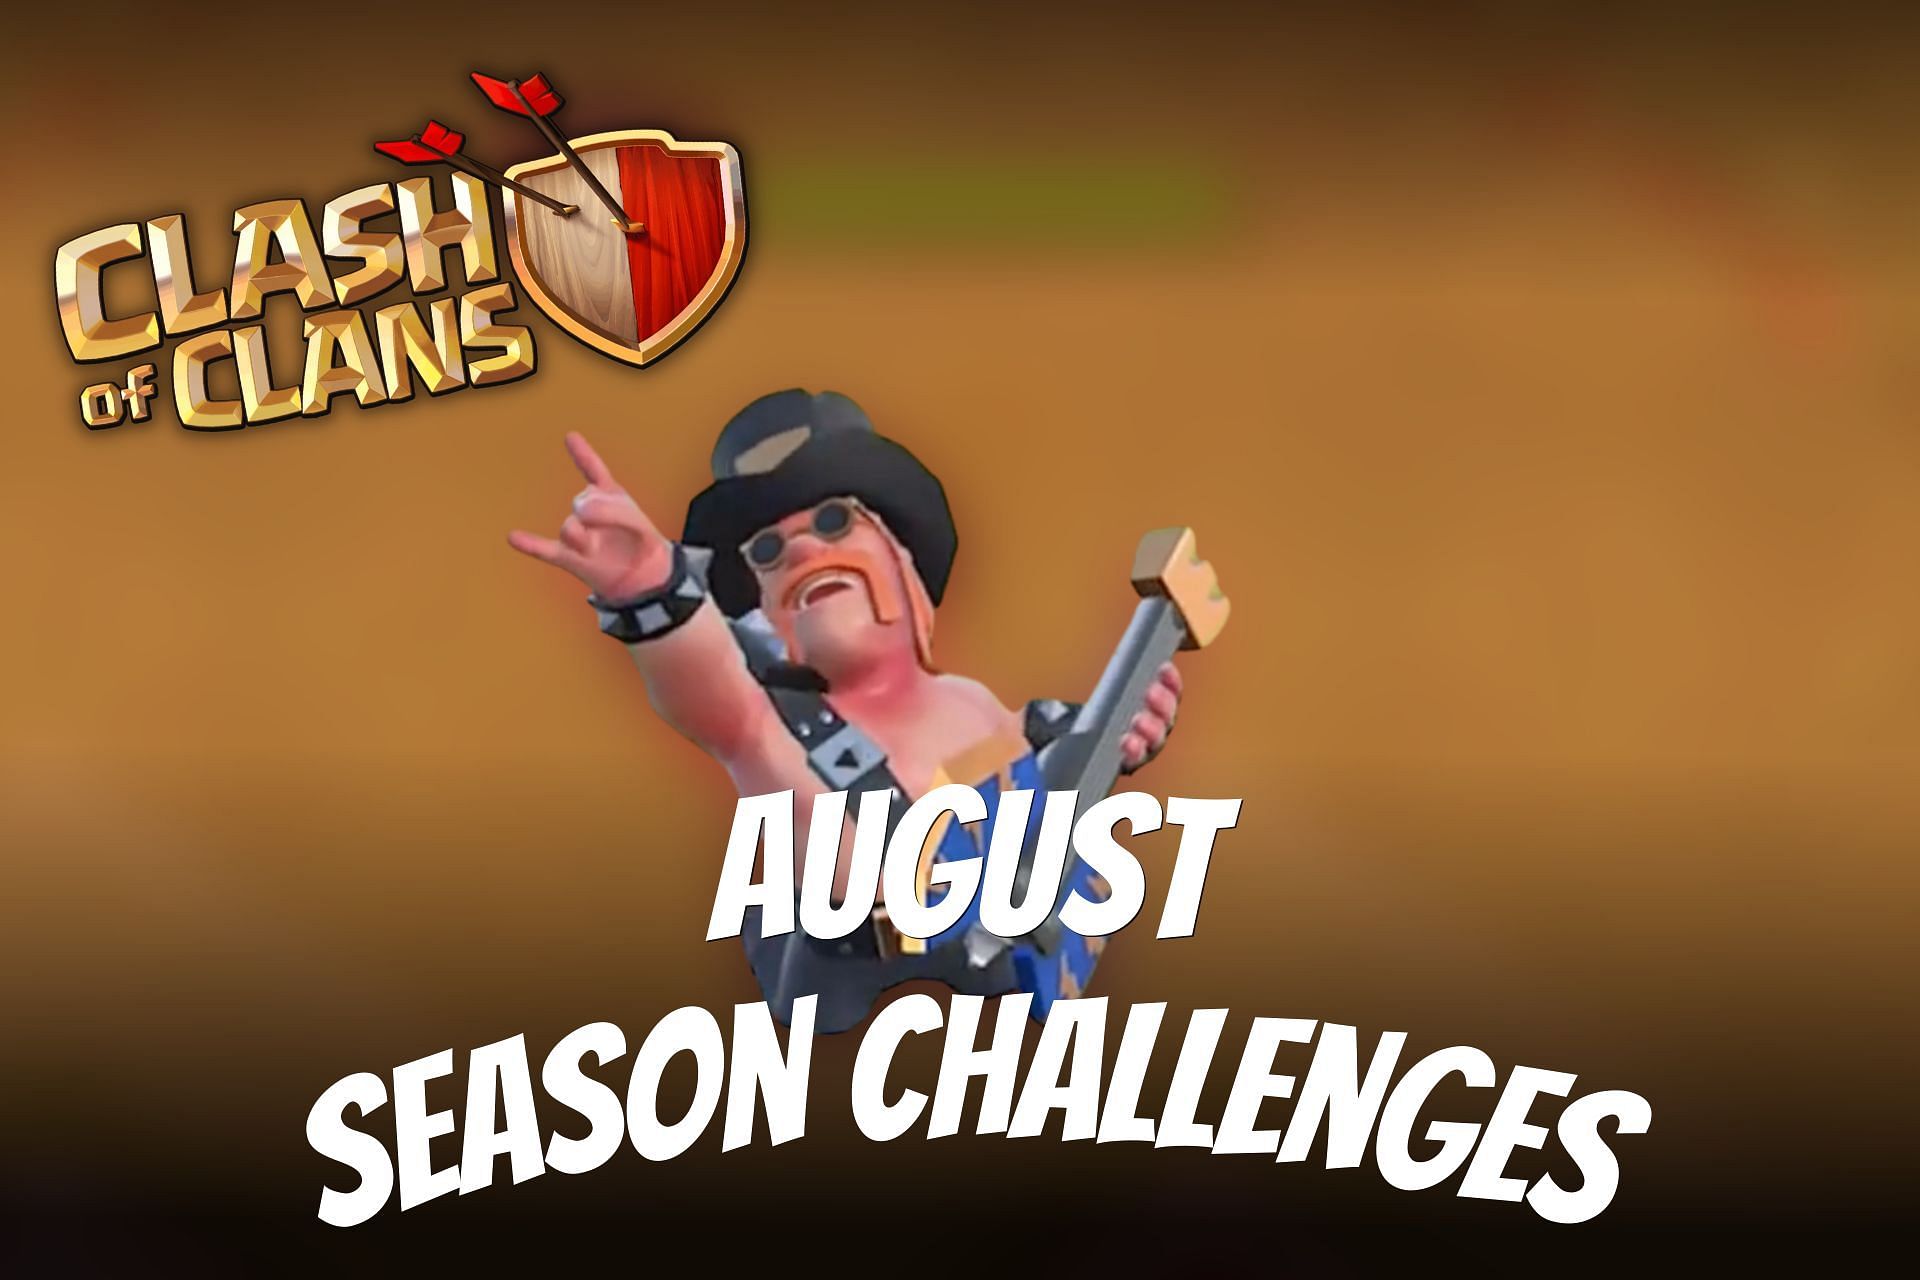 August Season Challenges in Clash of Clans Information, rewards, and more